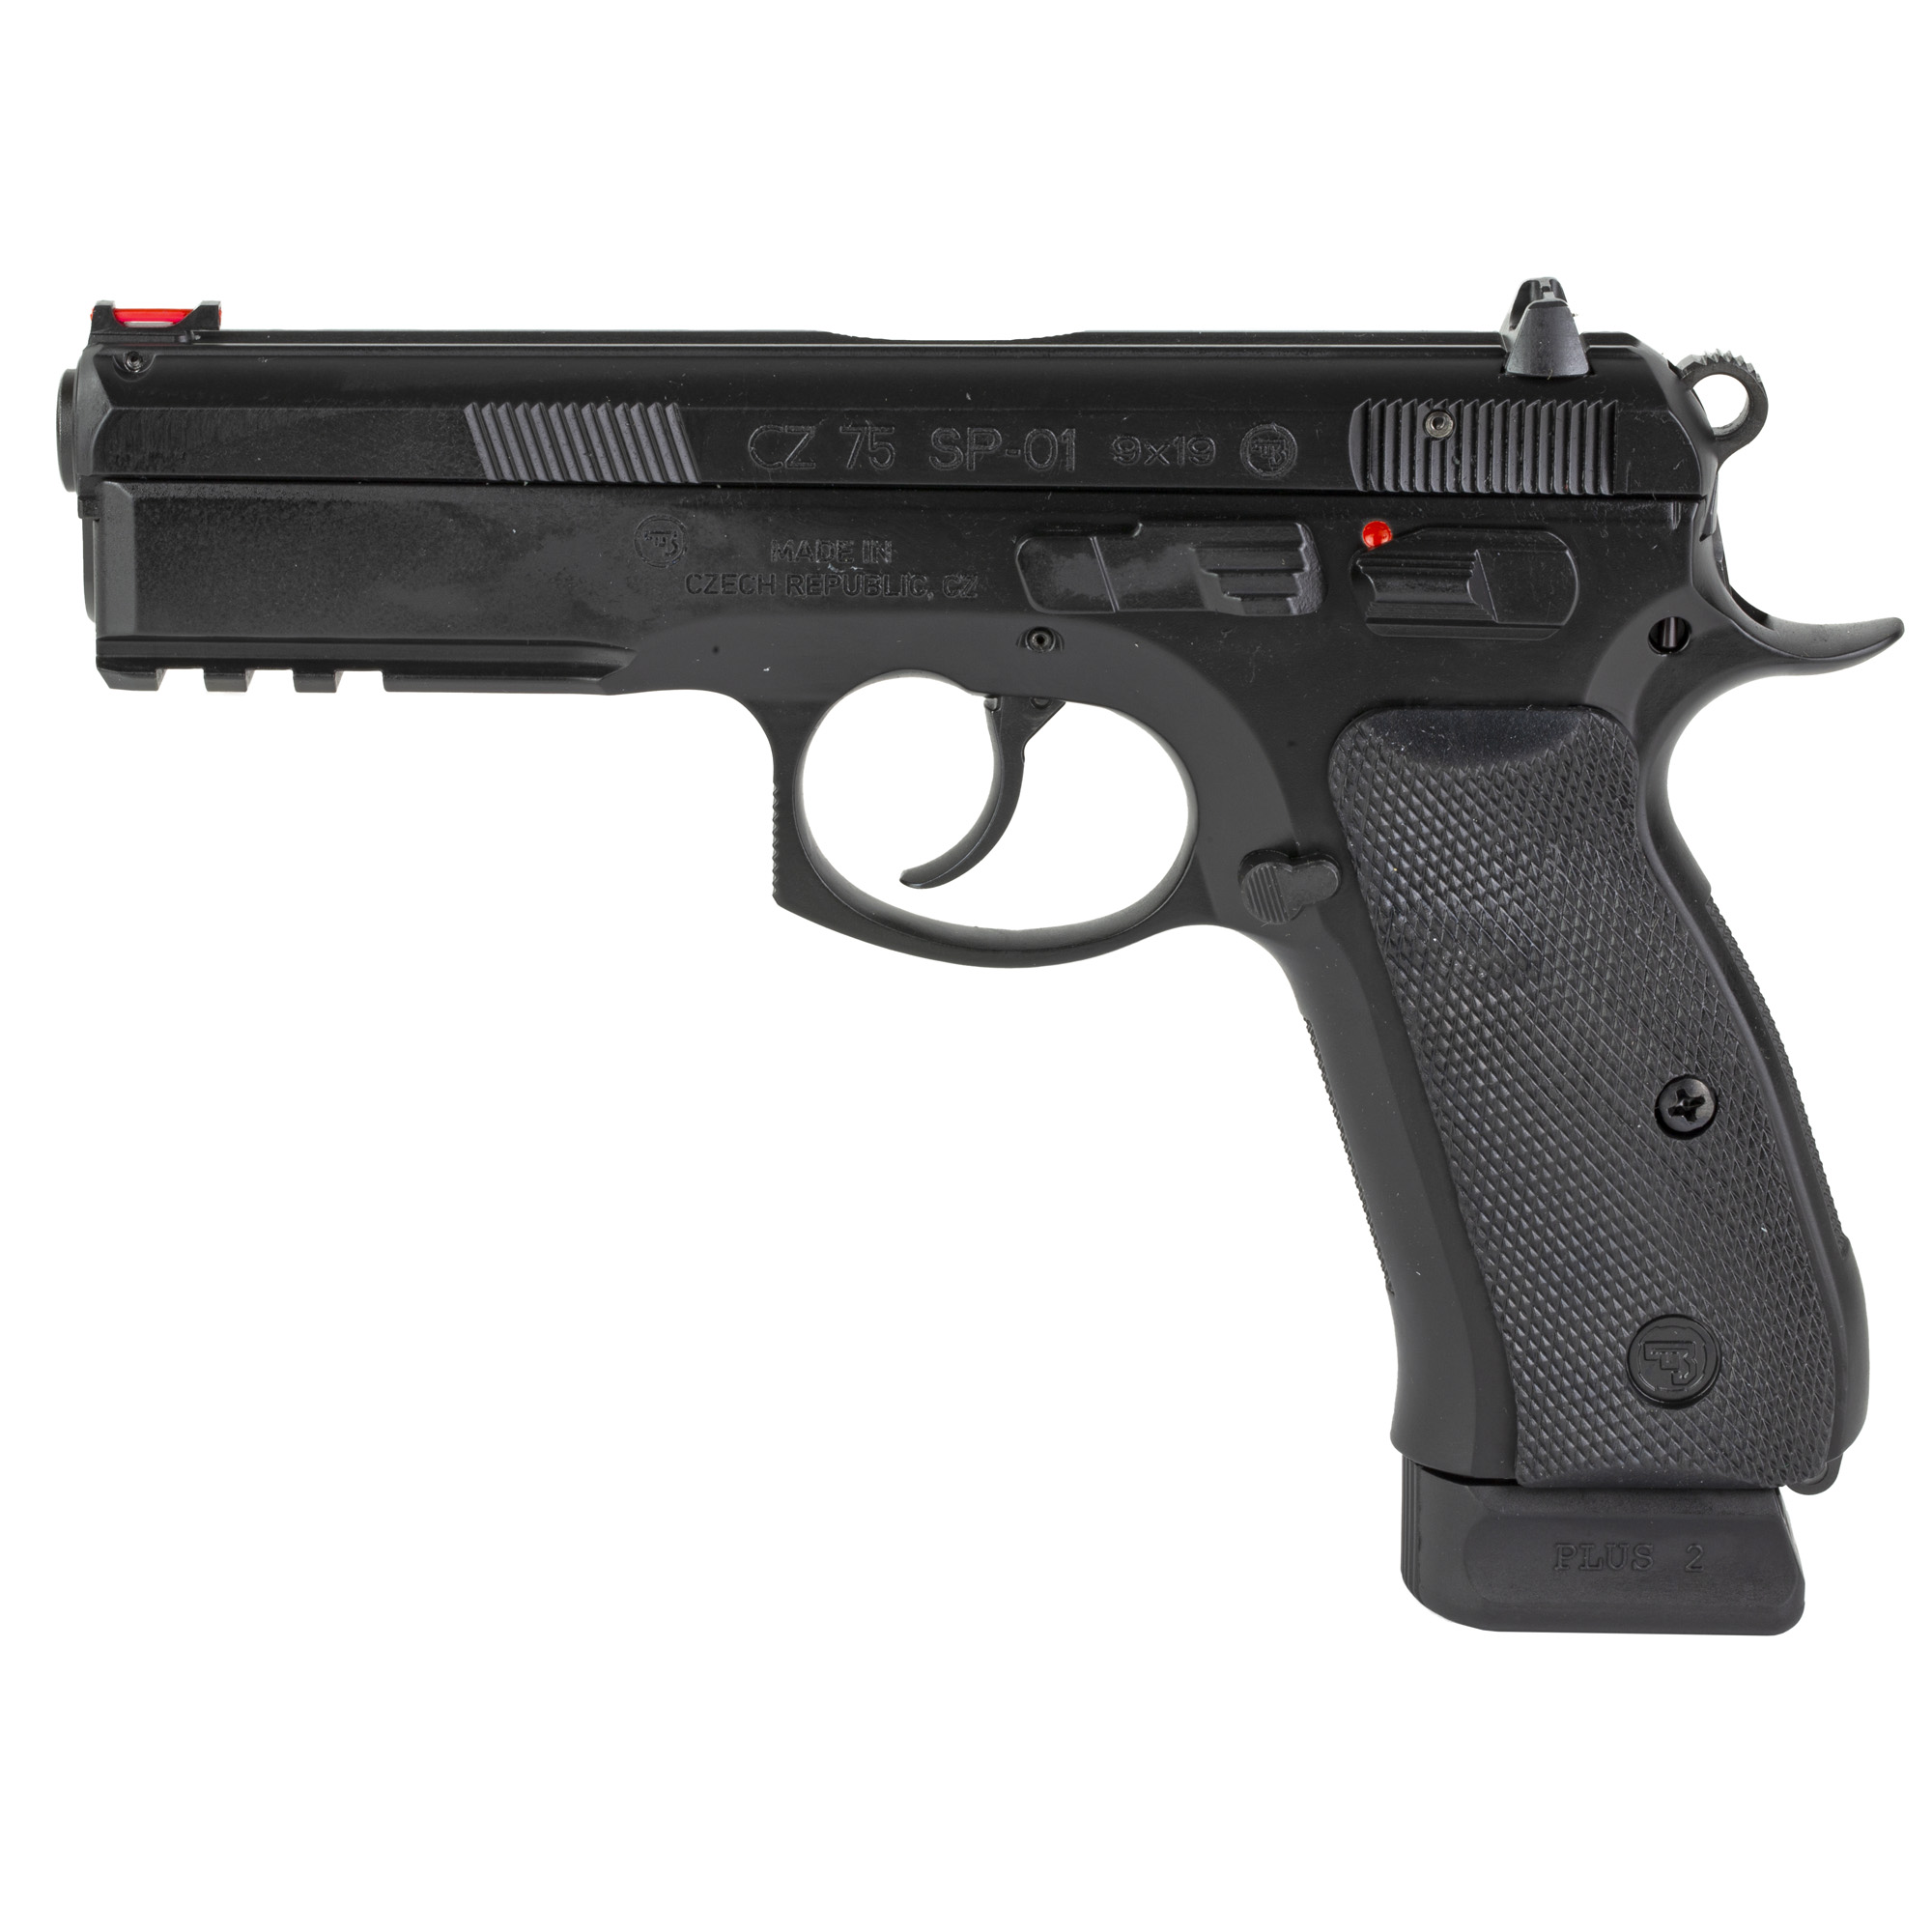 CZ, 75 SP-01, Double Action/Single Action, Semi-automatic, Metal Frame Pistol, Full Size, 9MM, 4.6